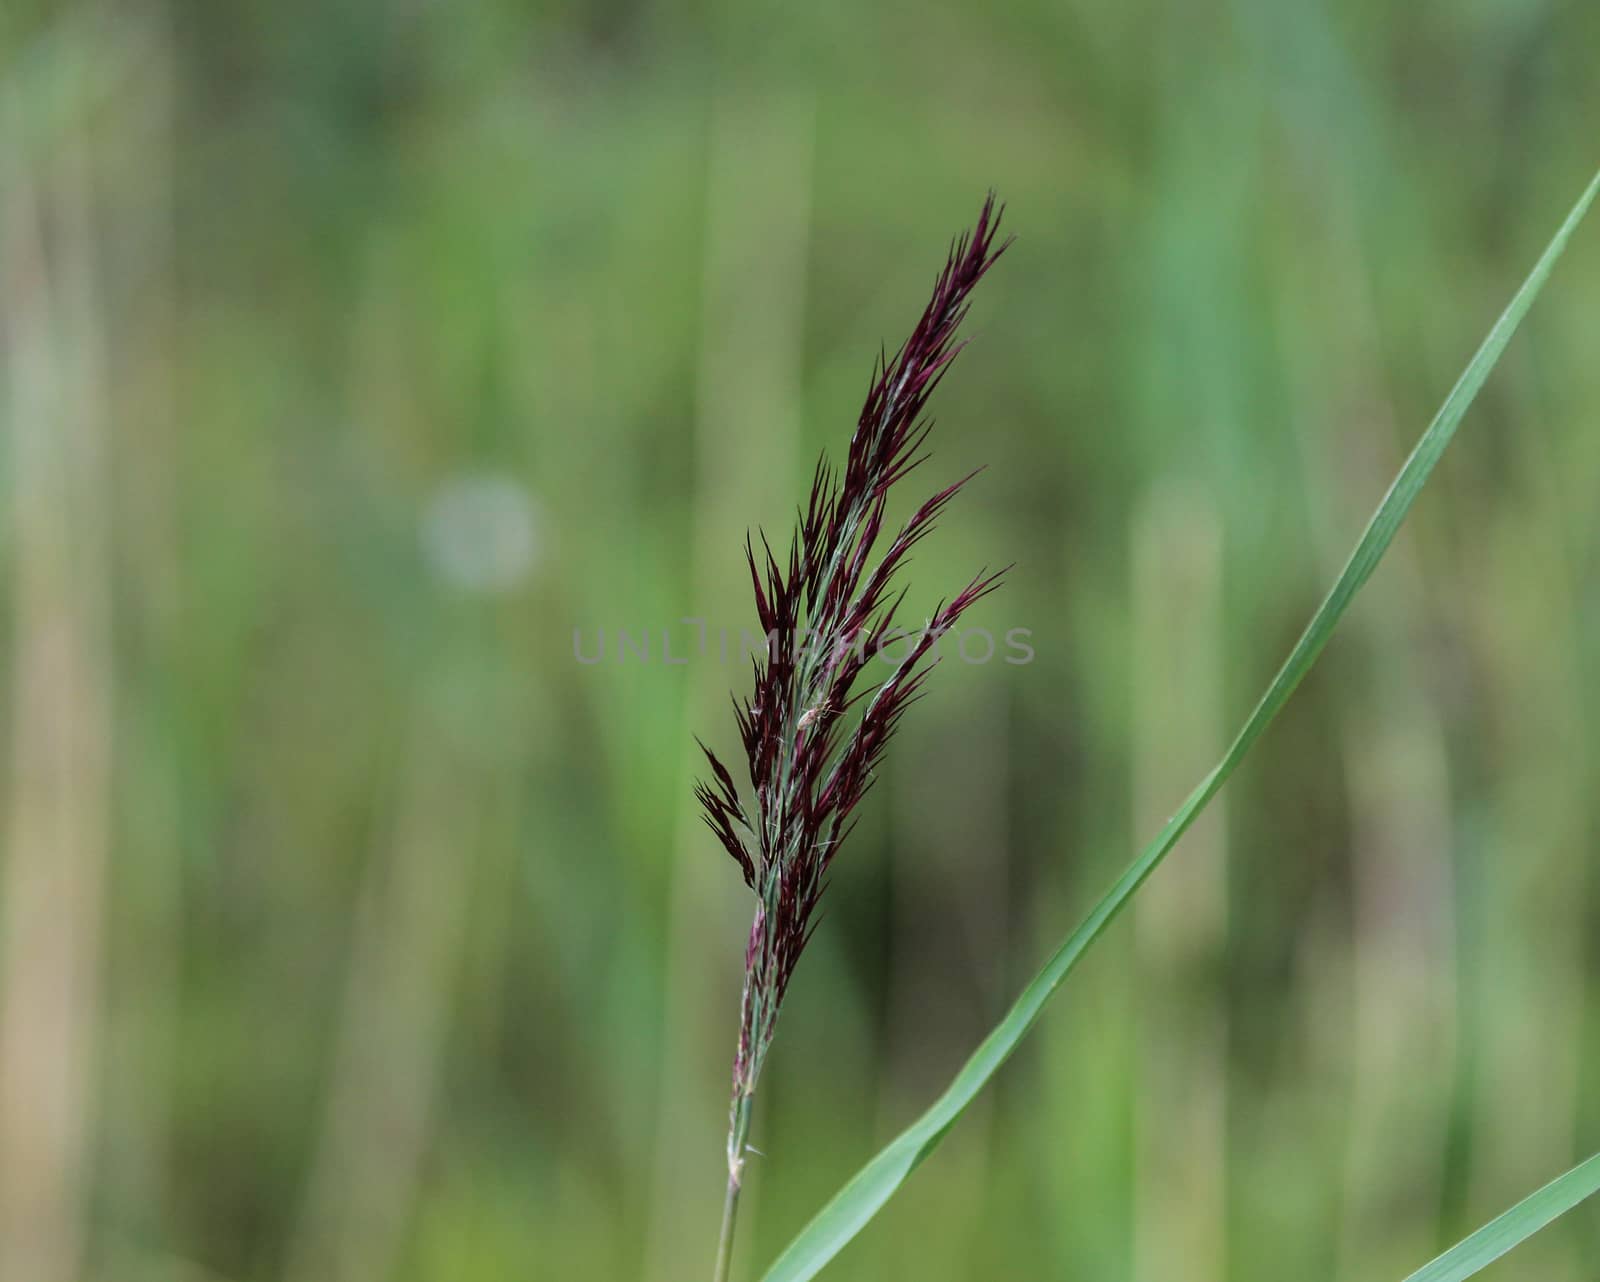 close up of Phragmites australis, also called common reed or reed